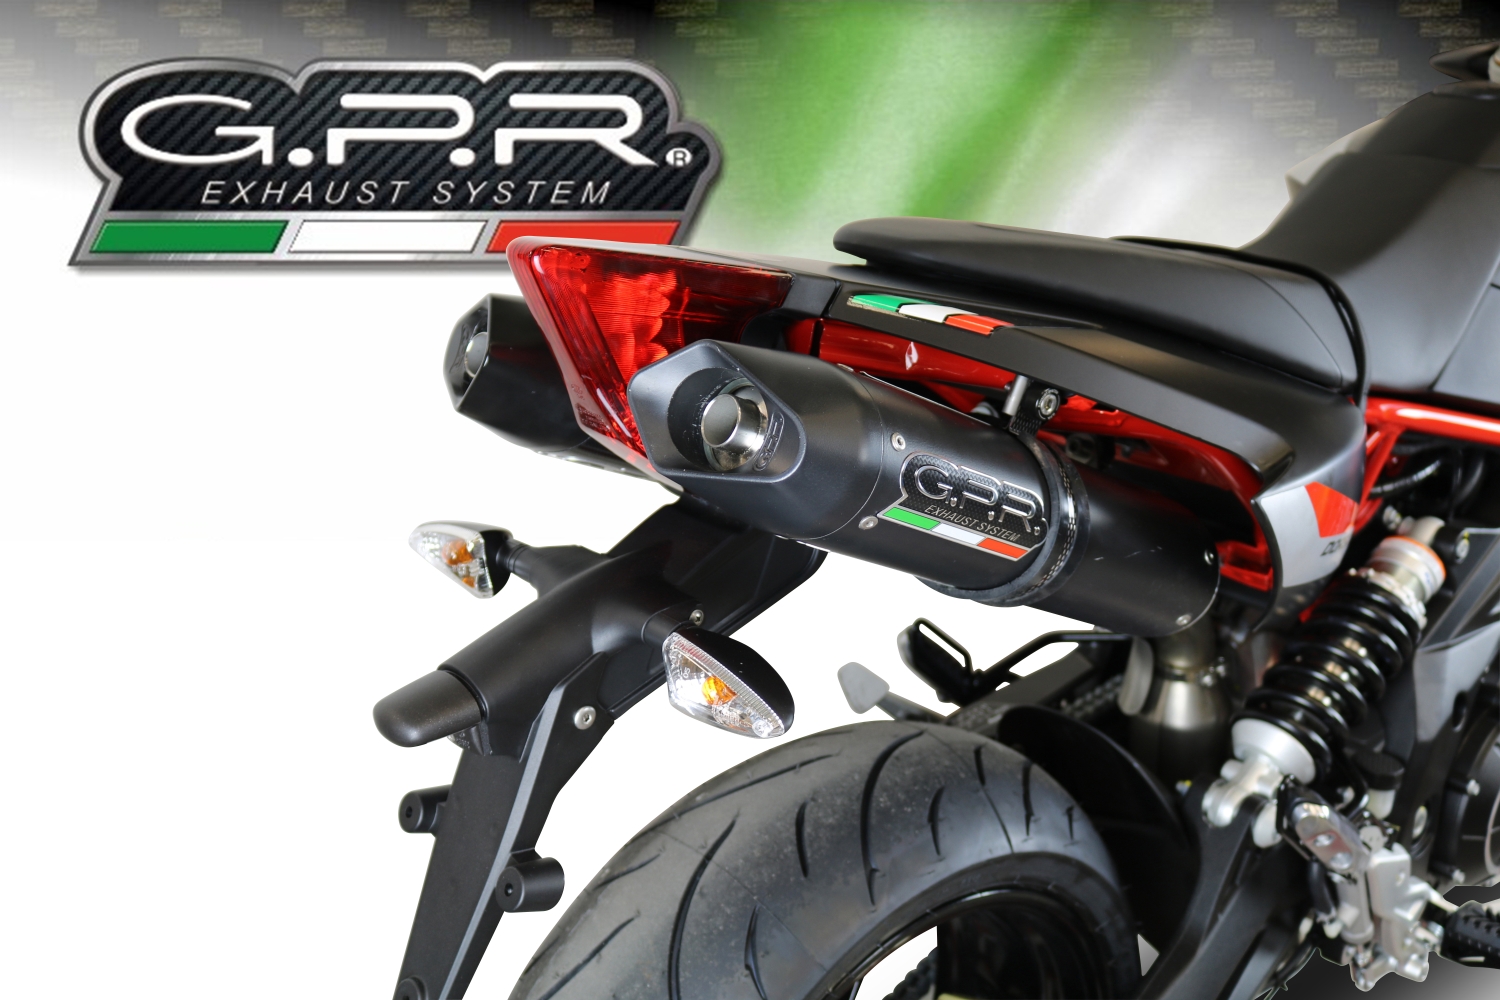 Exhaust system compatible with Aprilia Shiver 900 2017-2020, Furore Evo4 Nero, Dual Homologated legal slip-on exhaust including removable db killers and link pipes 